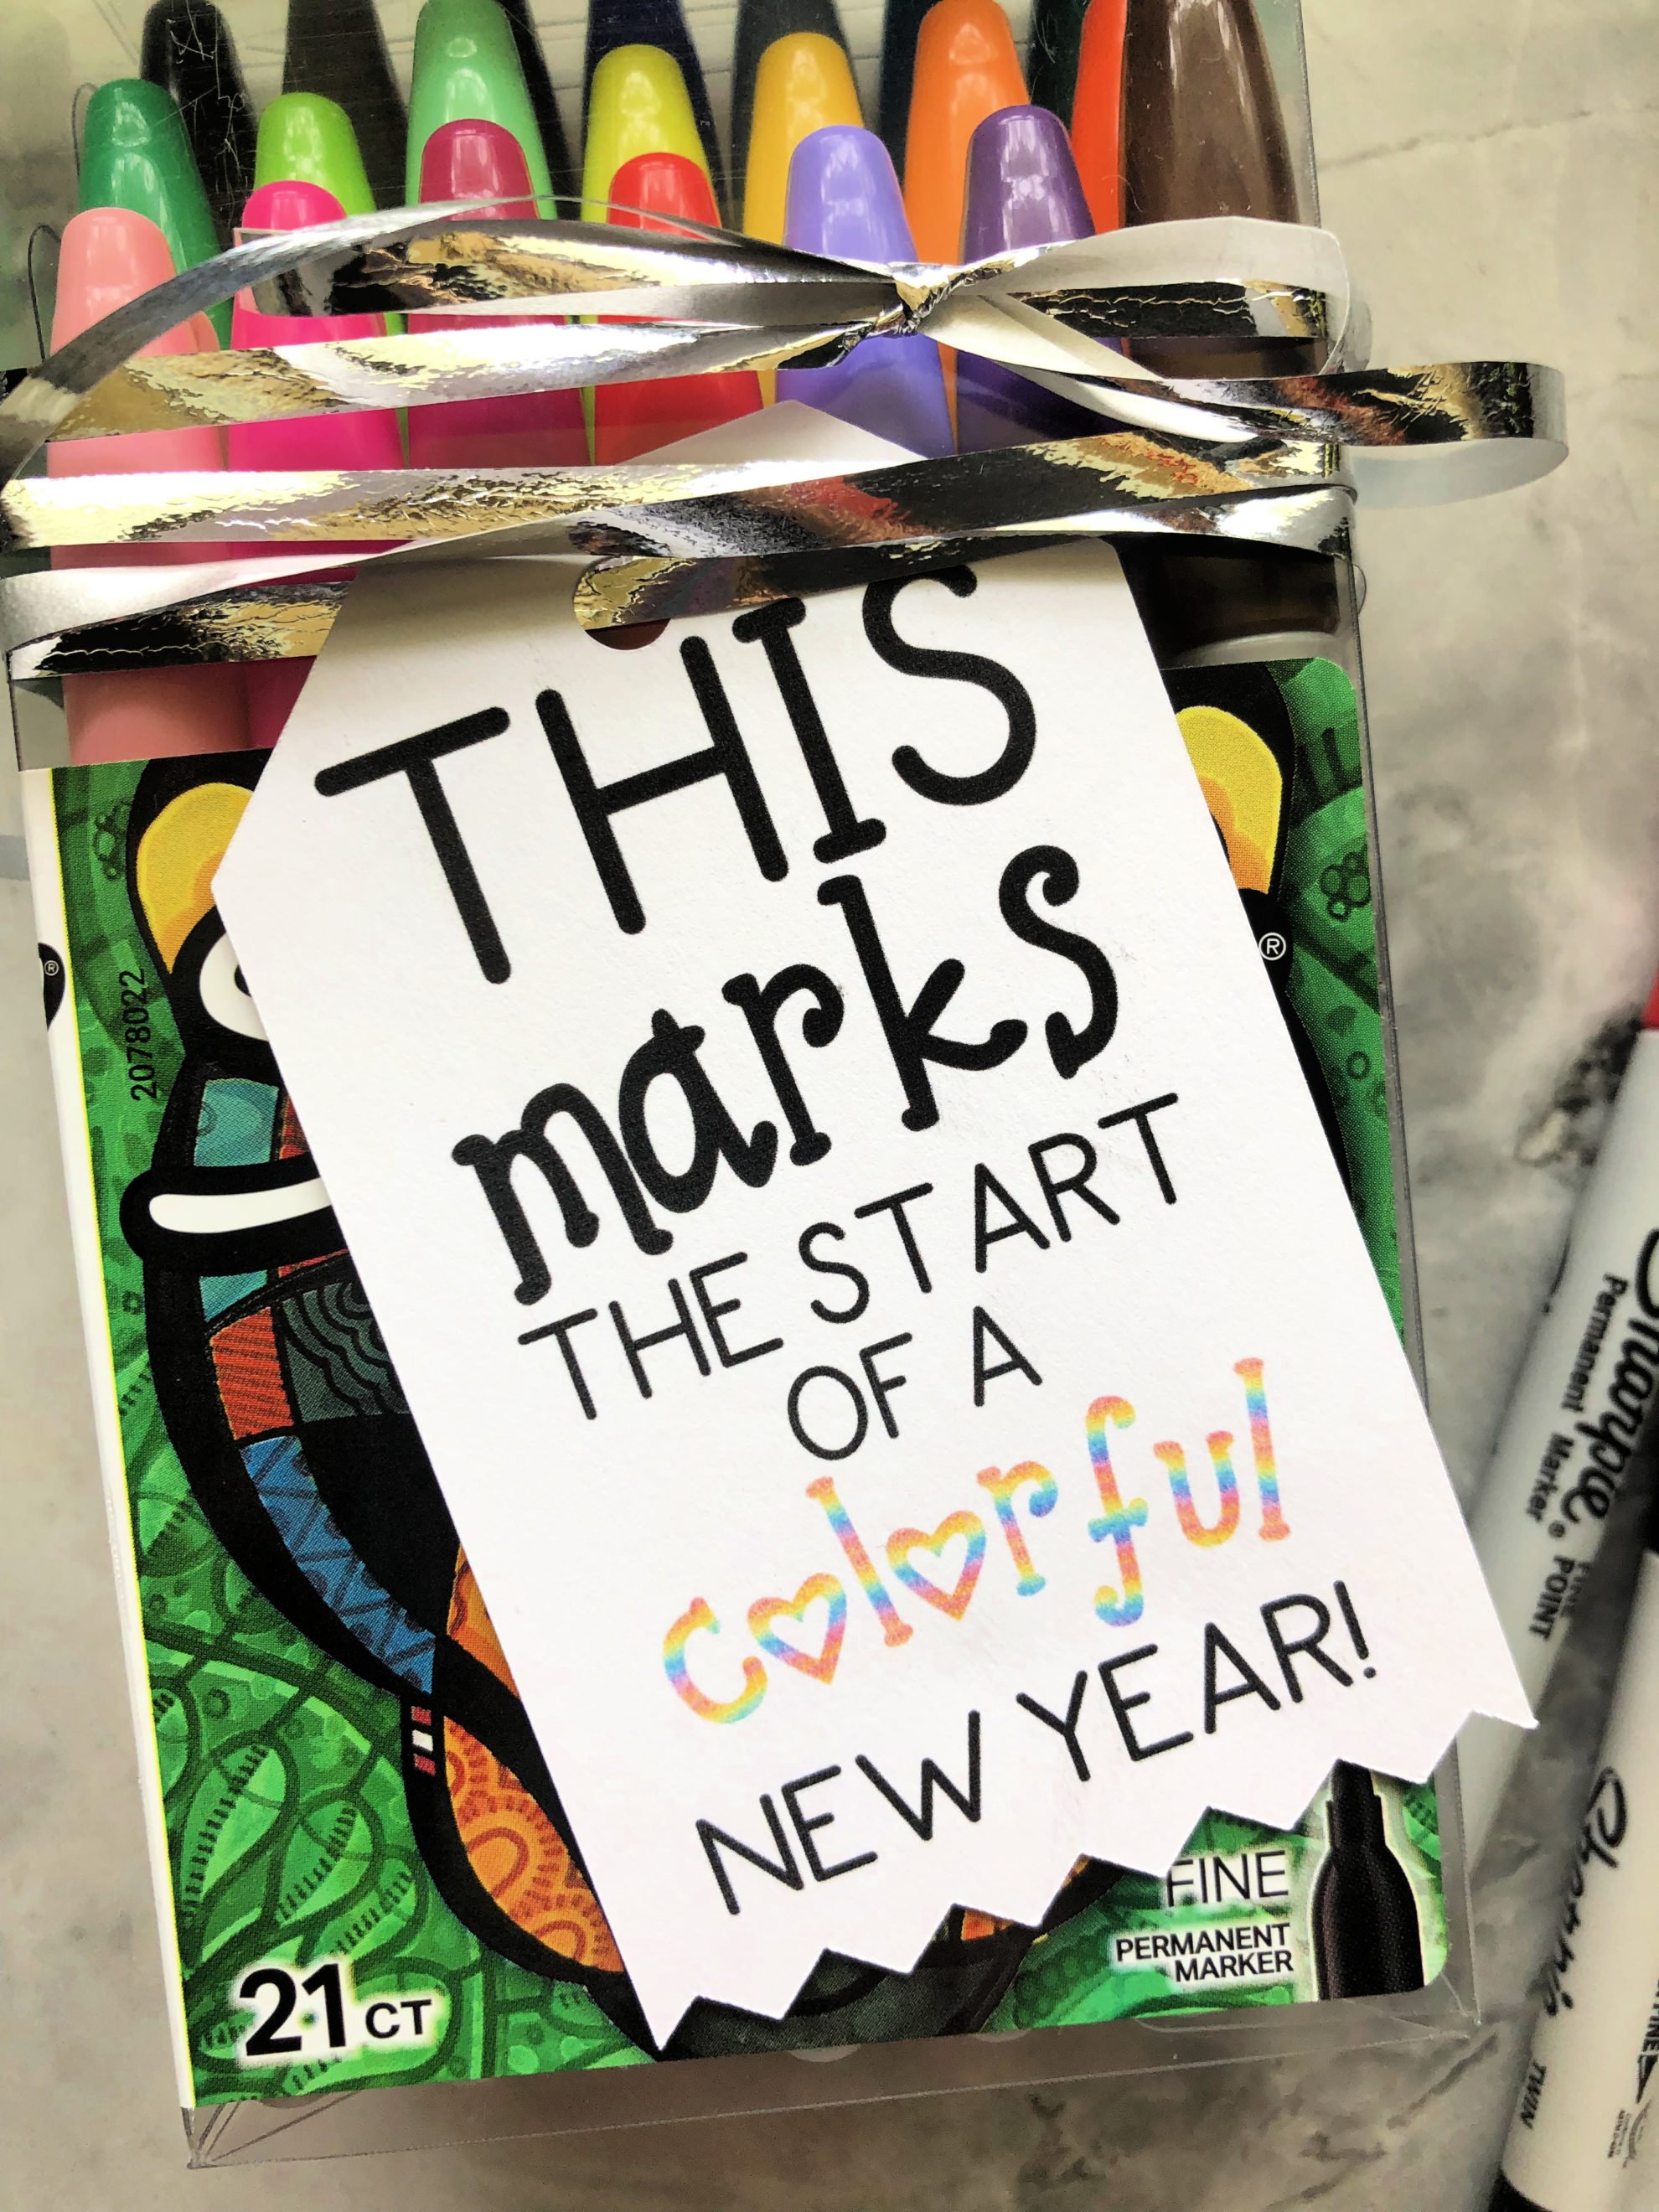 Close up of a sharpie bag with a tag that reads "This marks the start of a colorful new year"!